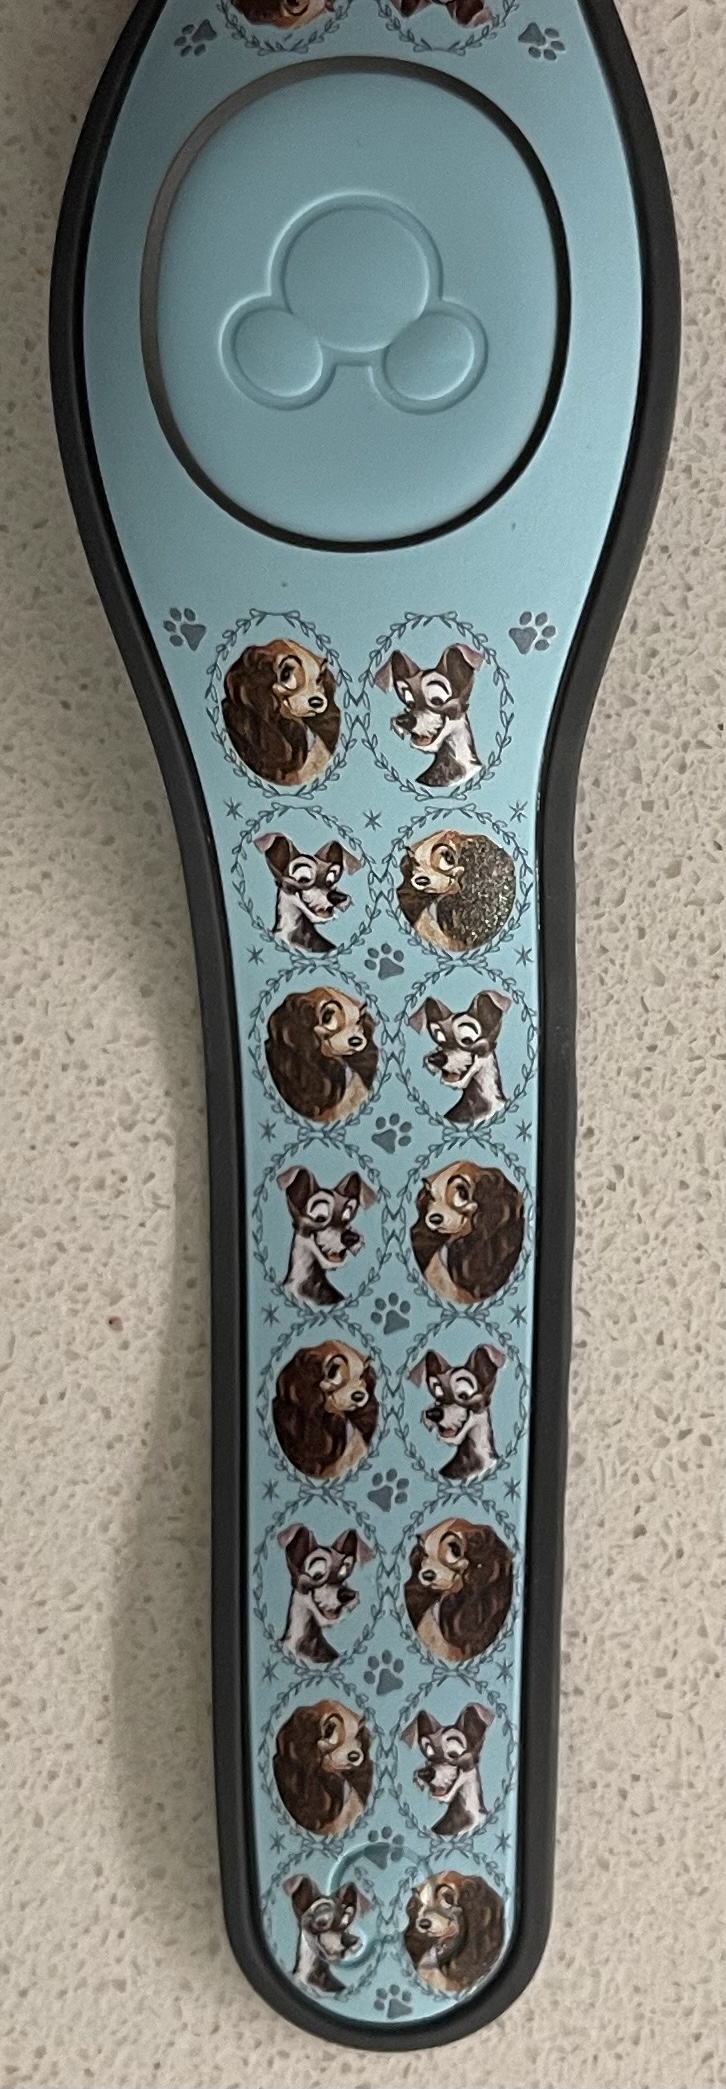 A new Dooney & Bourke – Lady and the Tramp Limited Release MagicBand was released today